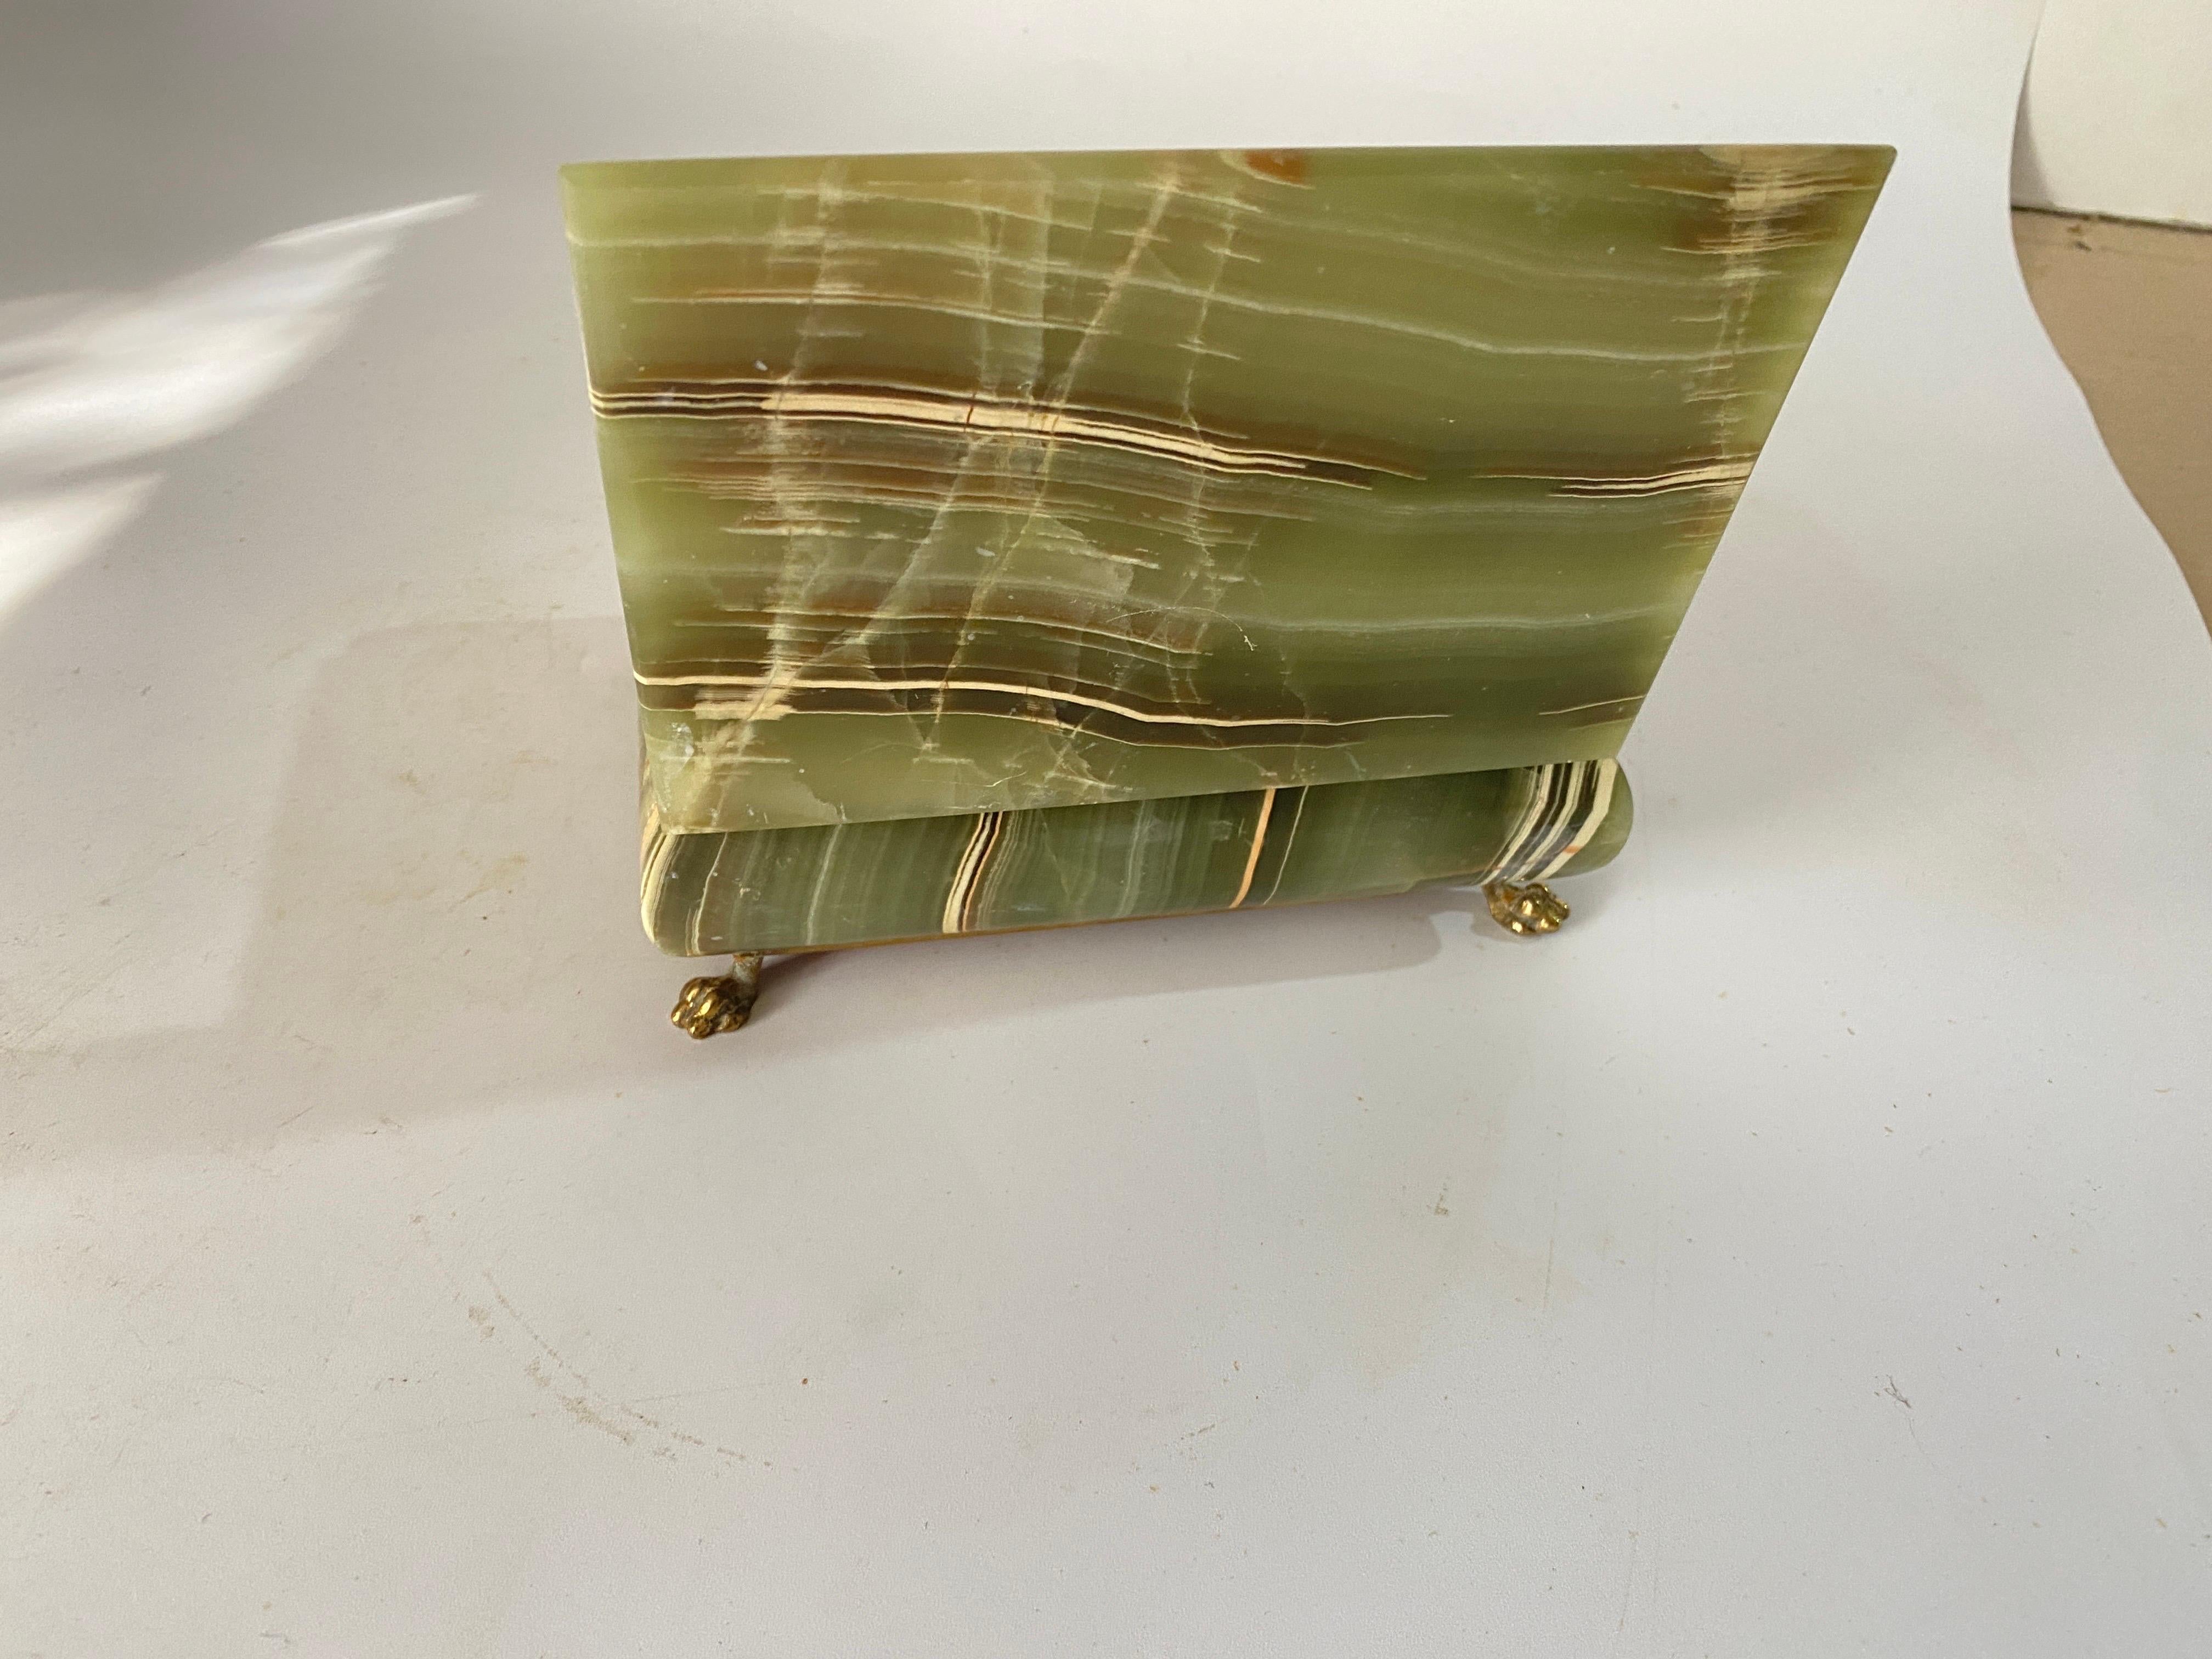  Green Onyx Marble and Brass Jewelry Display Box, Italy 1950 In Good Condition For Sale In Auribeau sur Siagne, FR